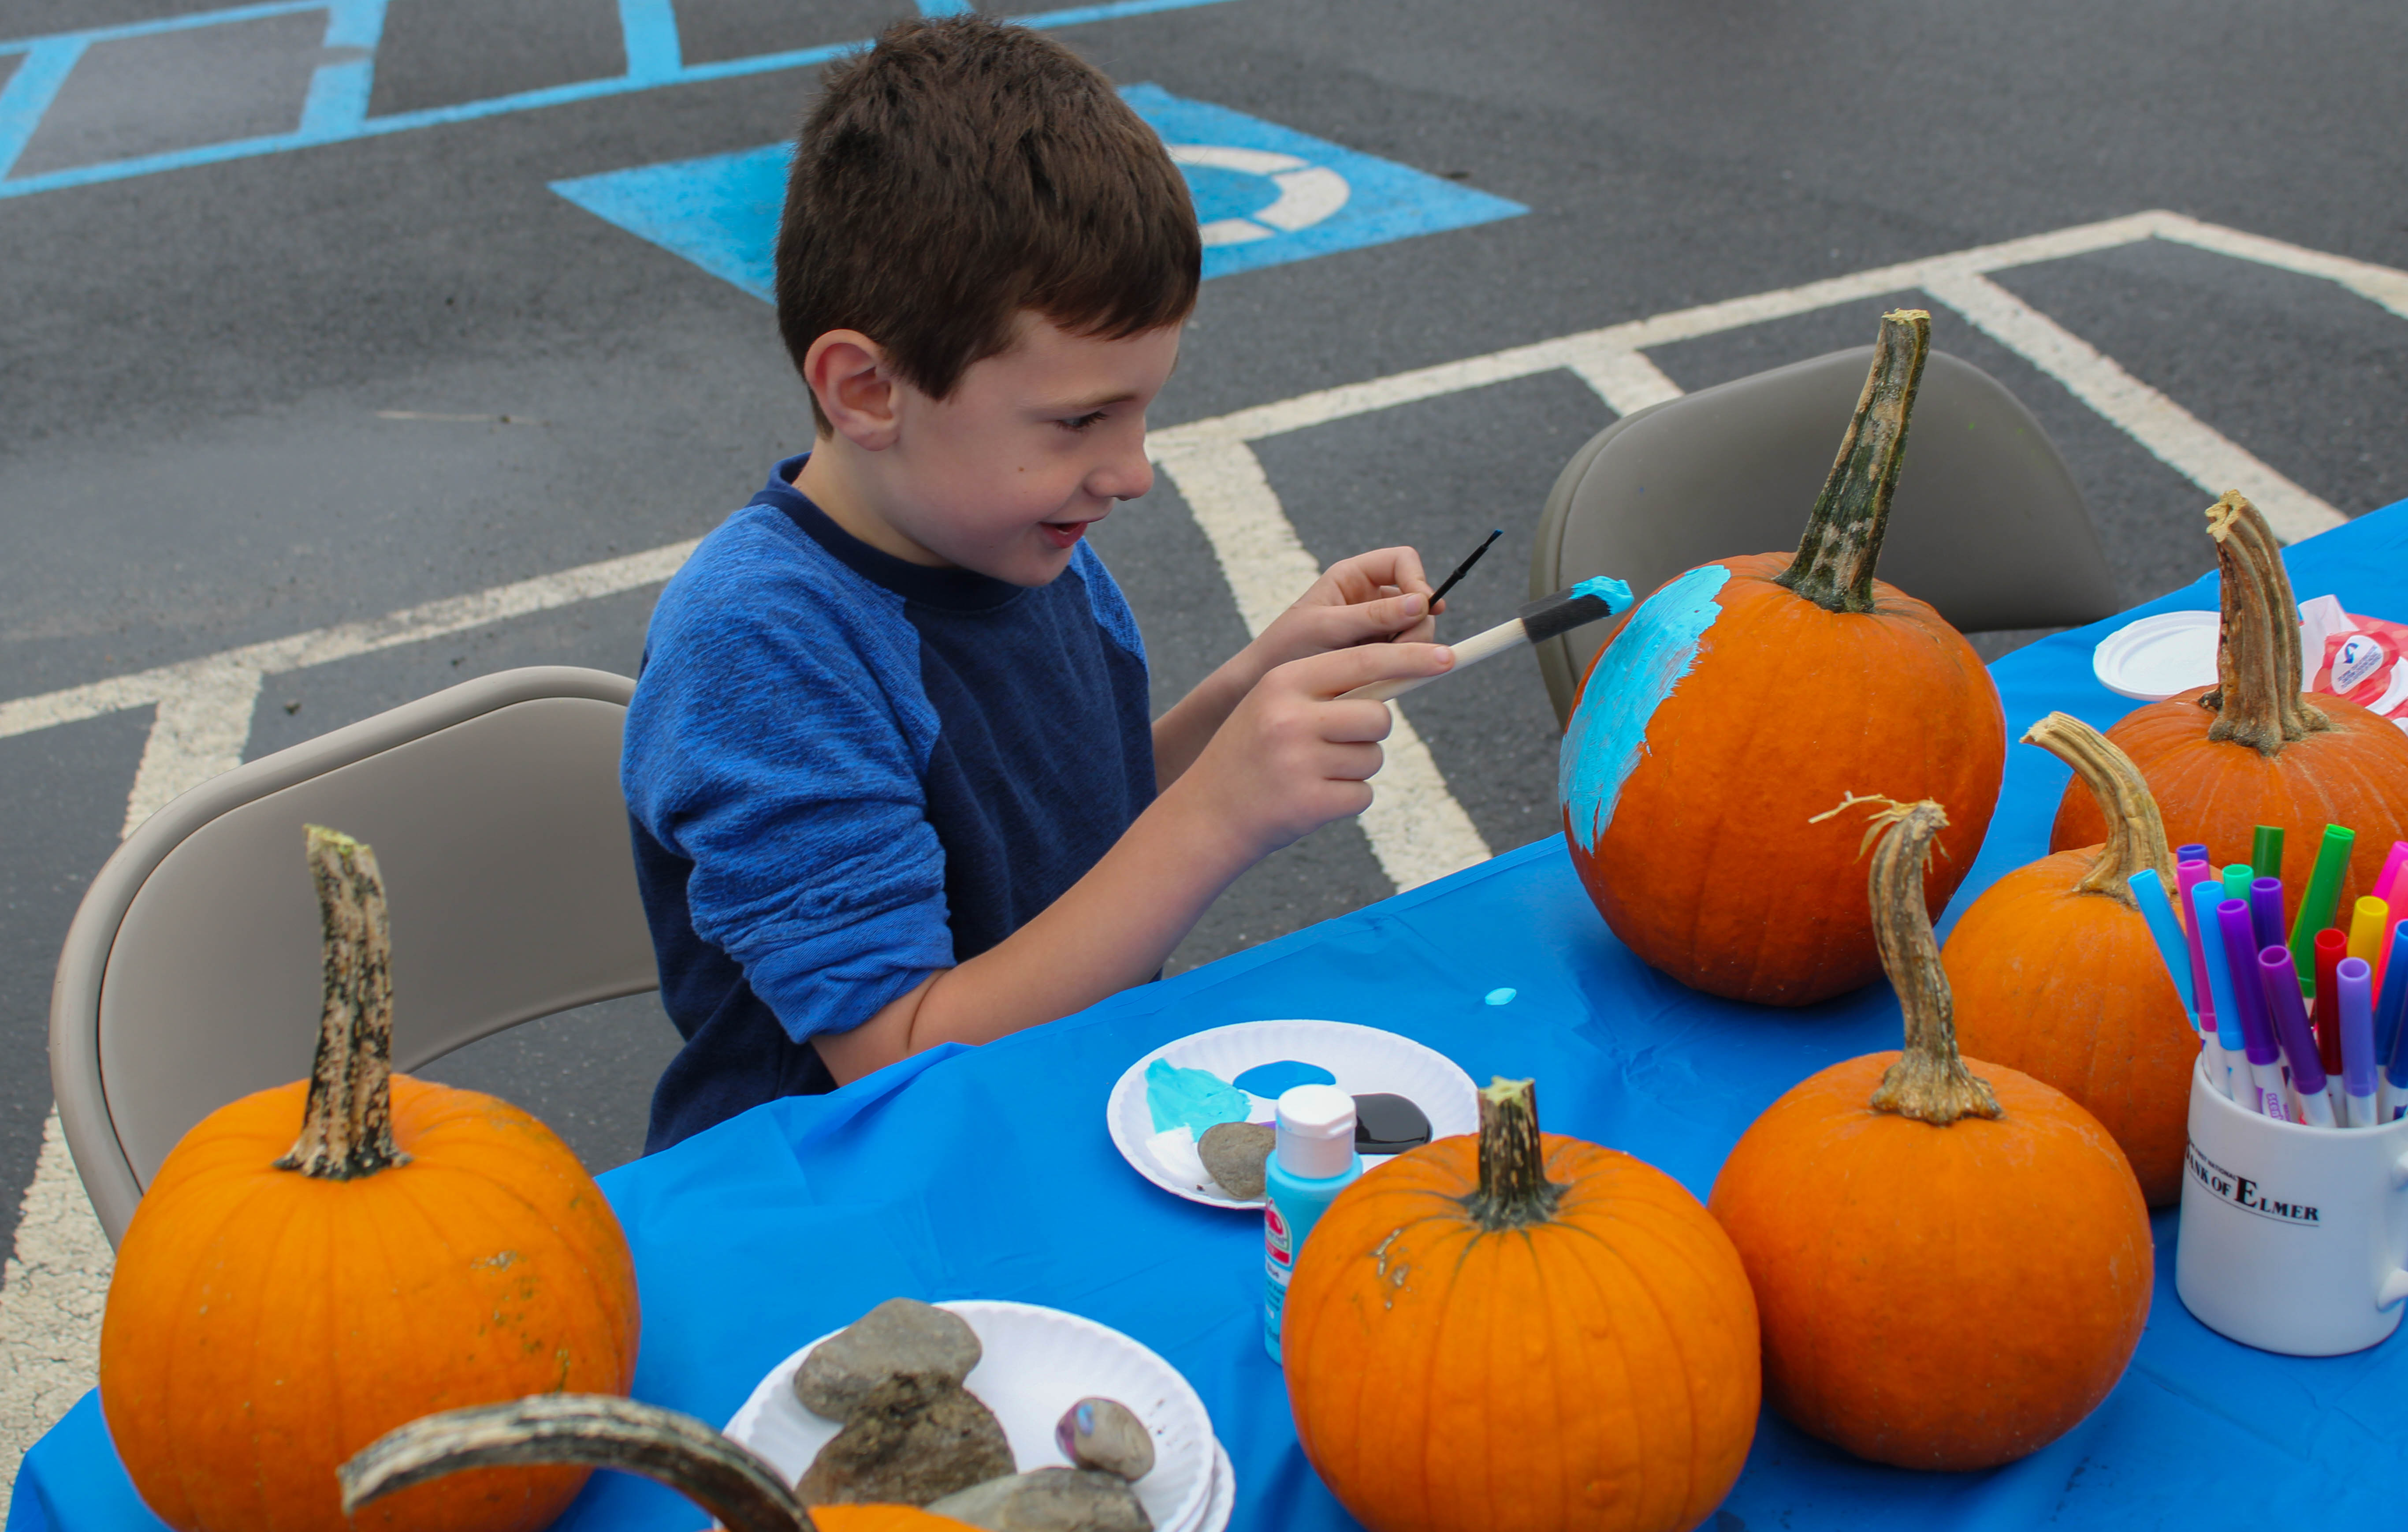 Six-year-old Aidan Young paints pumpkins at Harvest Day Festival in Elmer, Saturday, Oct. 1, 2022.